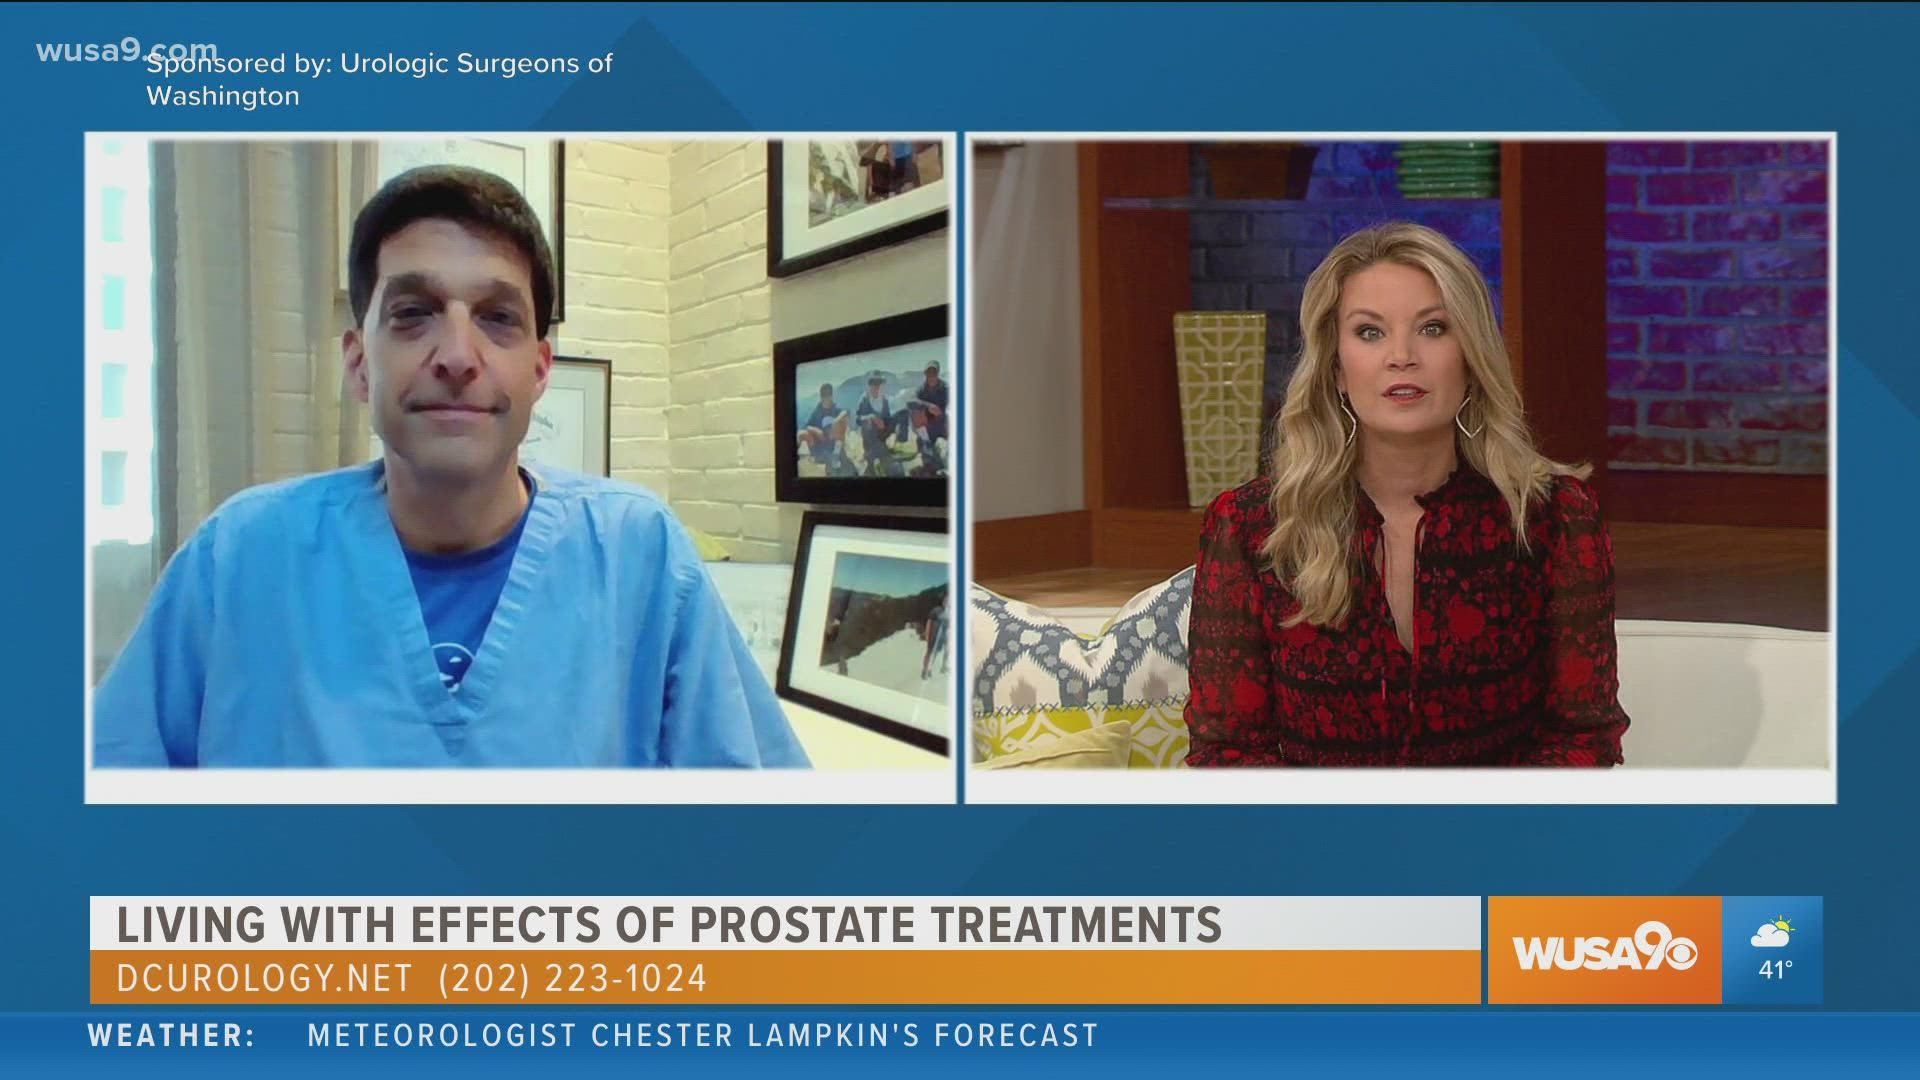 Effects of prostate cancer treatment are normal & shouldn't keep men from screenings. The effects can be easily treated.  Sponsor: Urologic Surgeons of Washington.